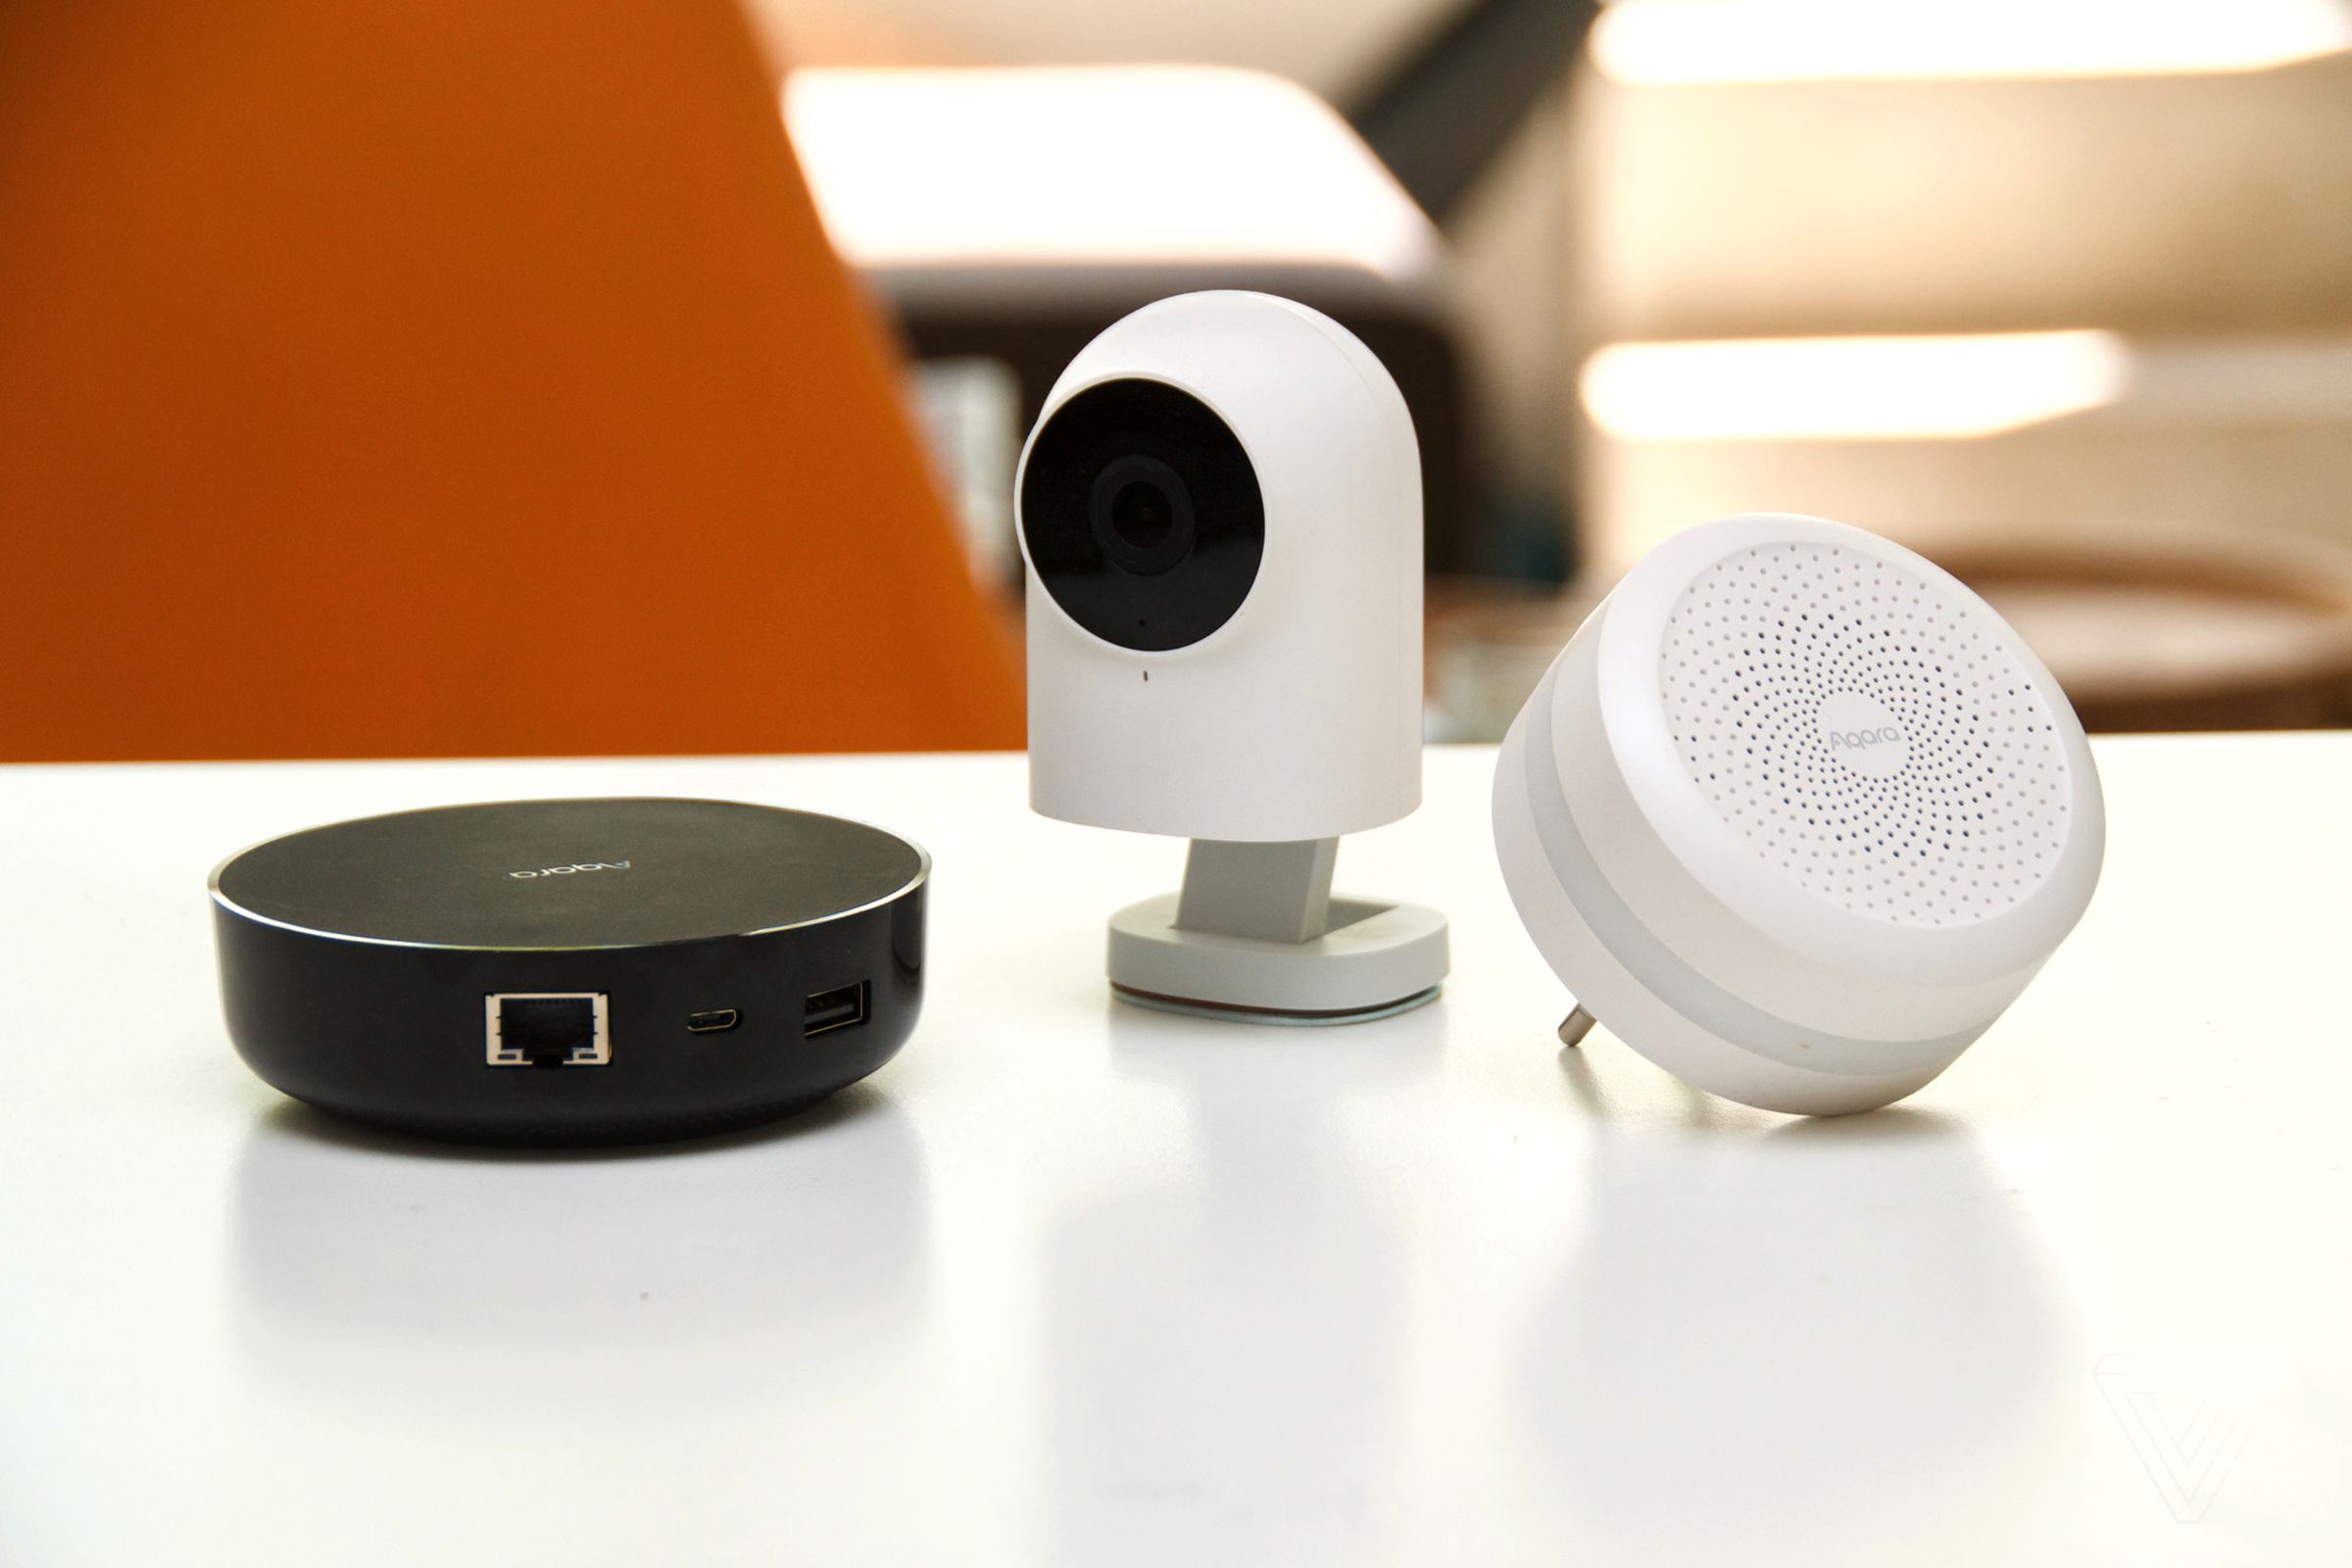 Three Aqara smart home devices on a white table. An orange chair is in the backdrop.